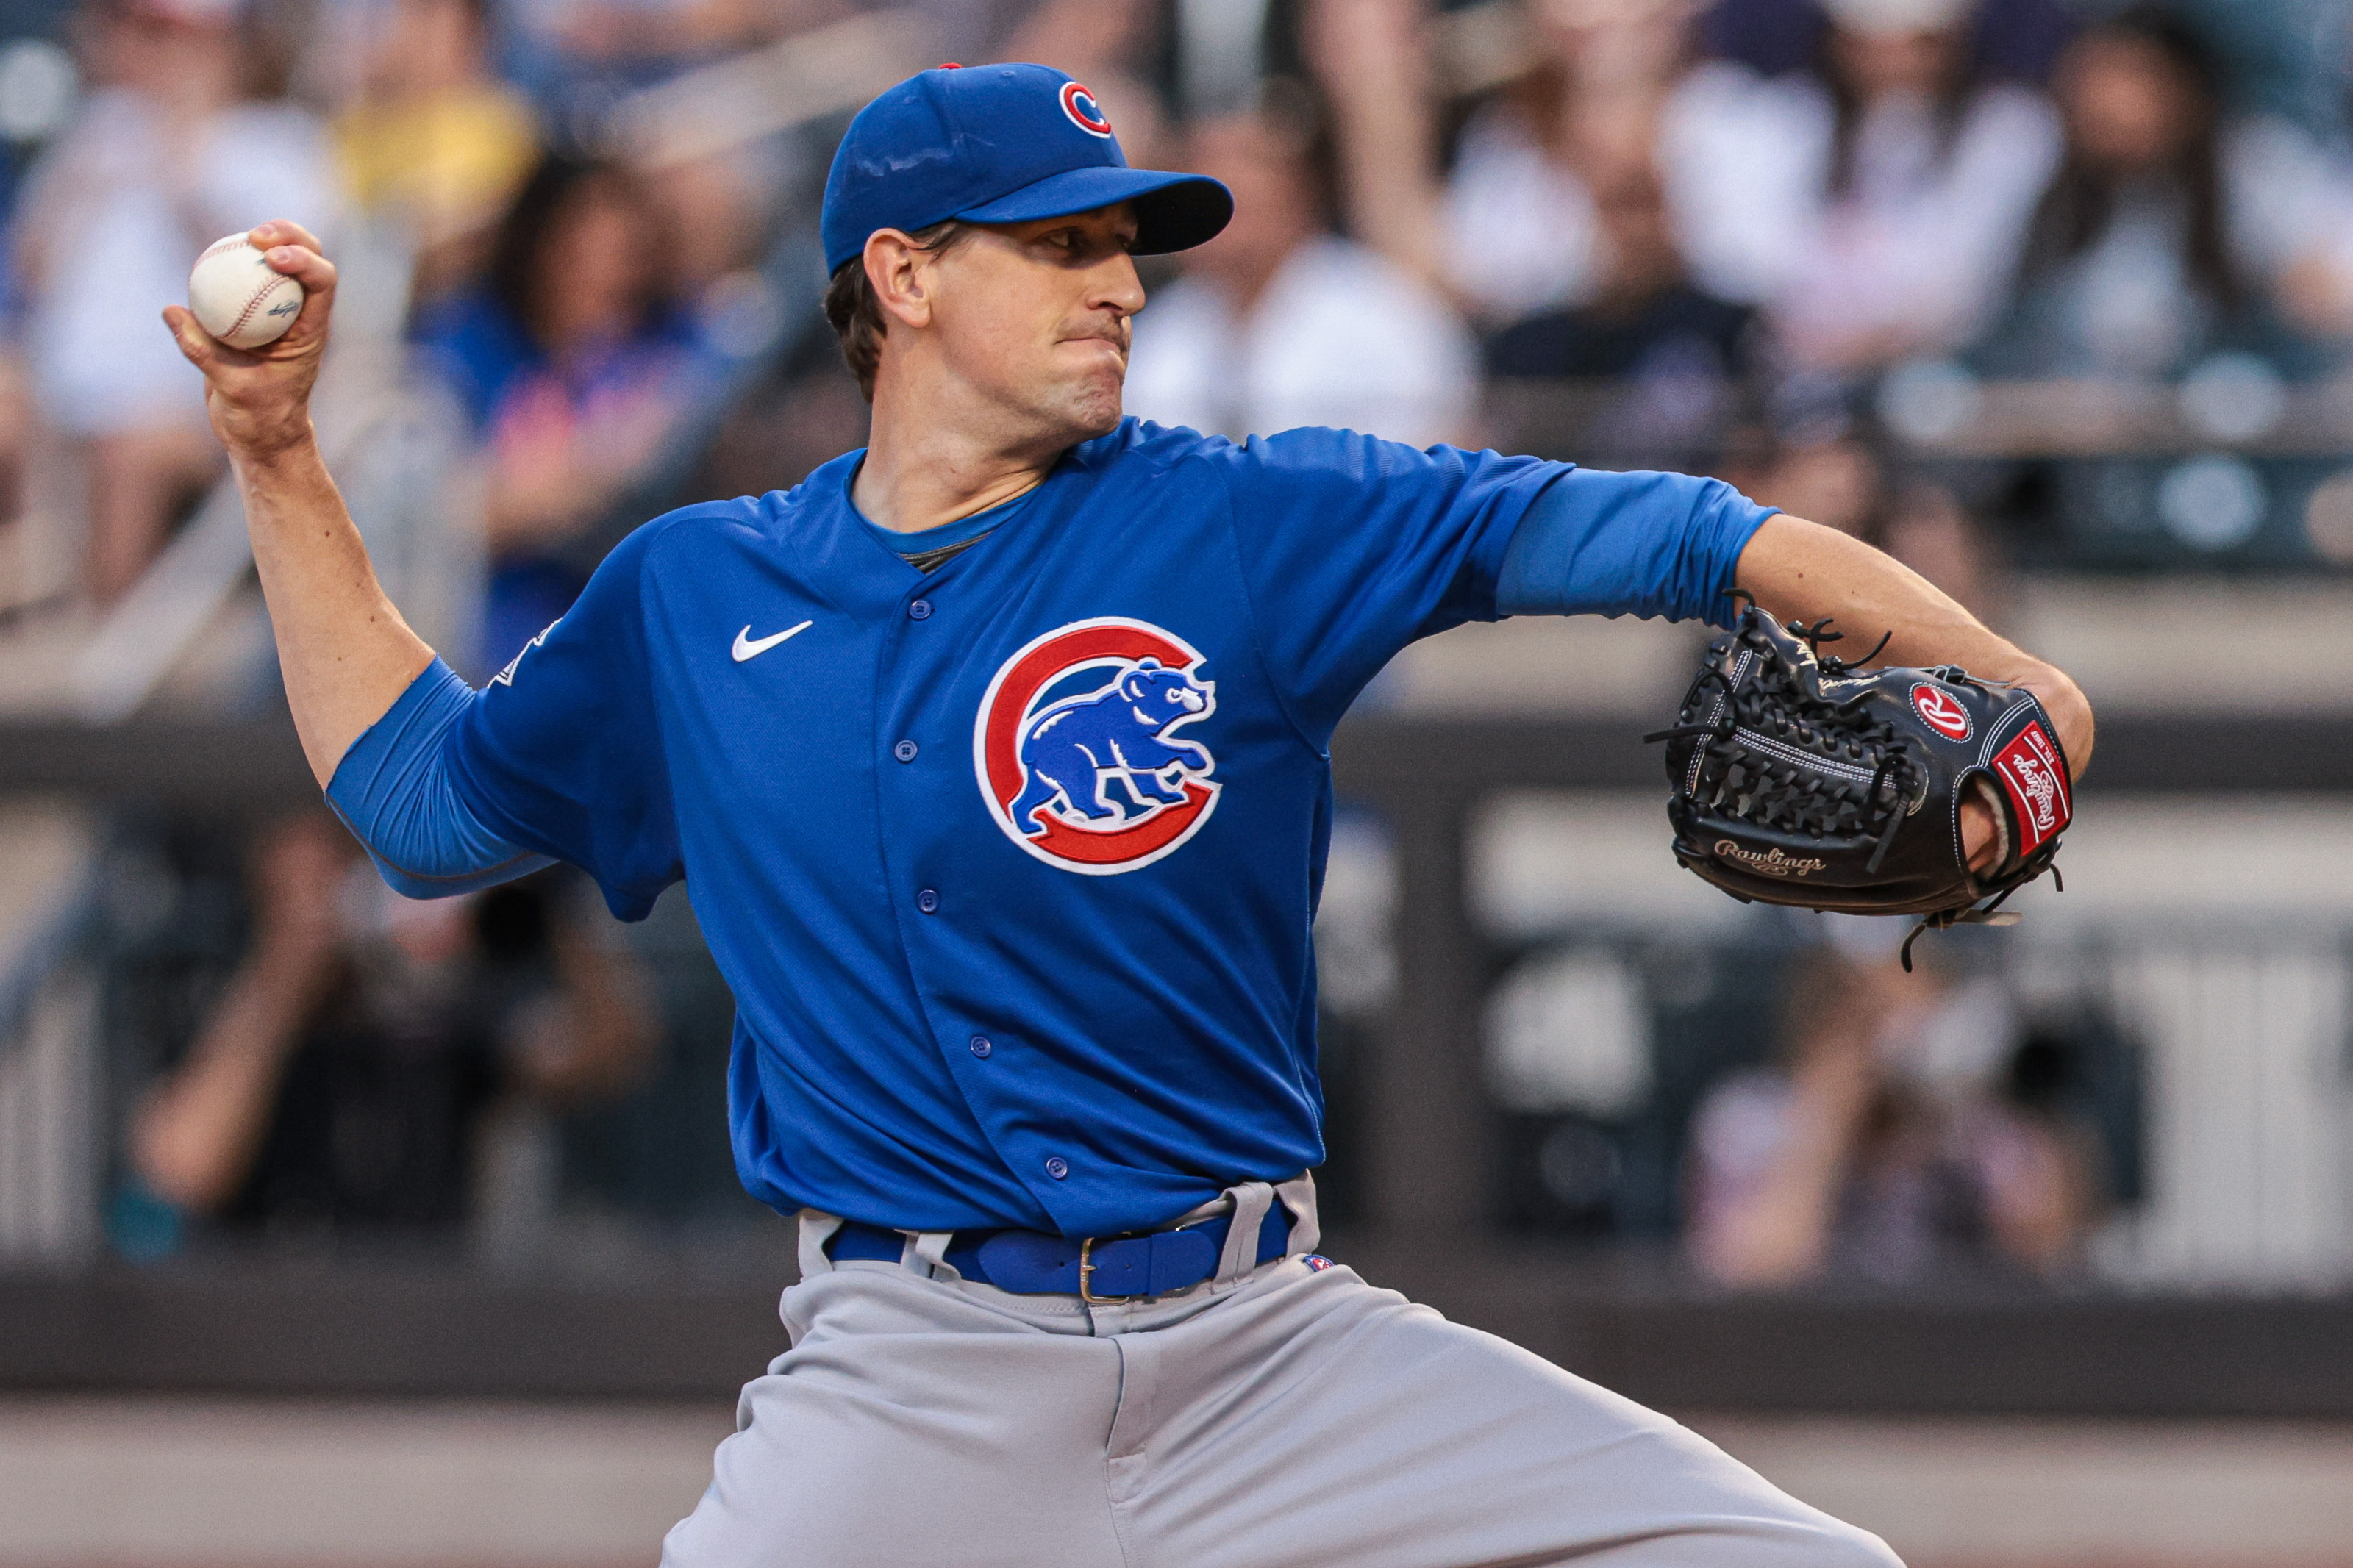 Kyle Hendricks happy to see Cubs as playoff contenders